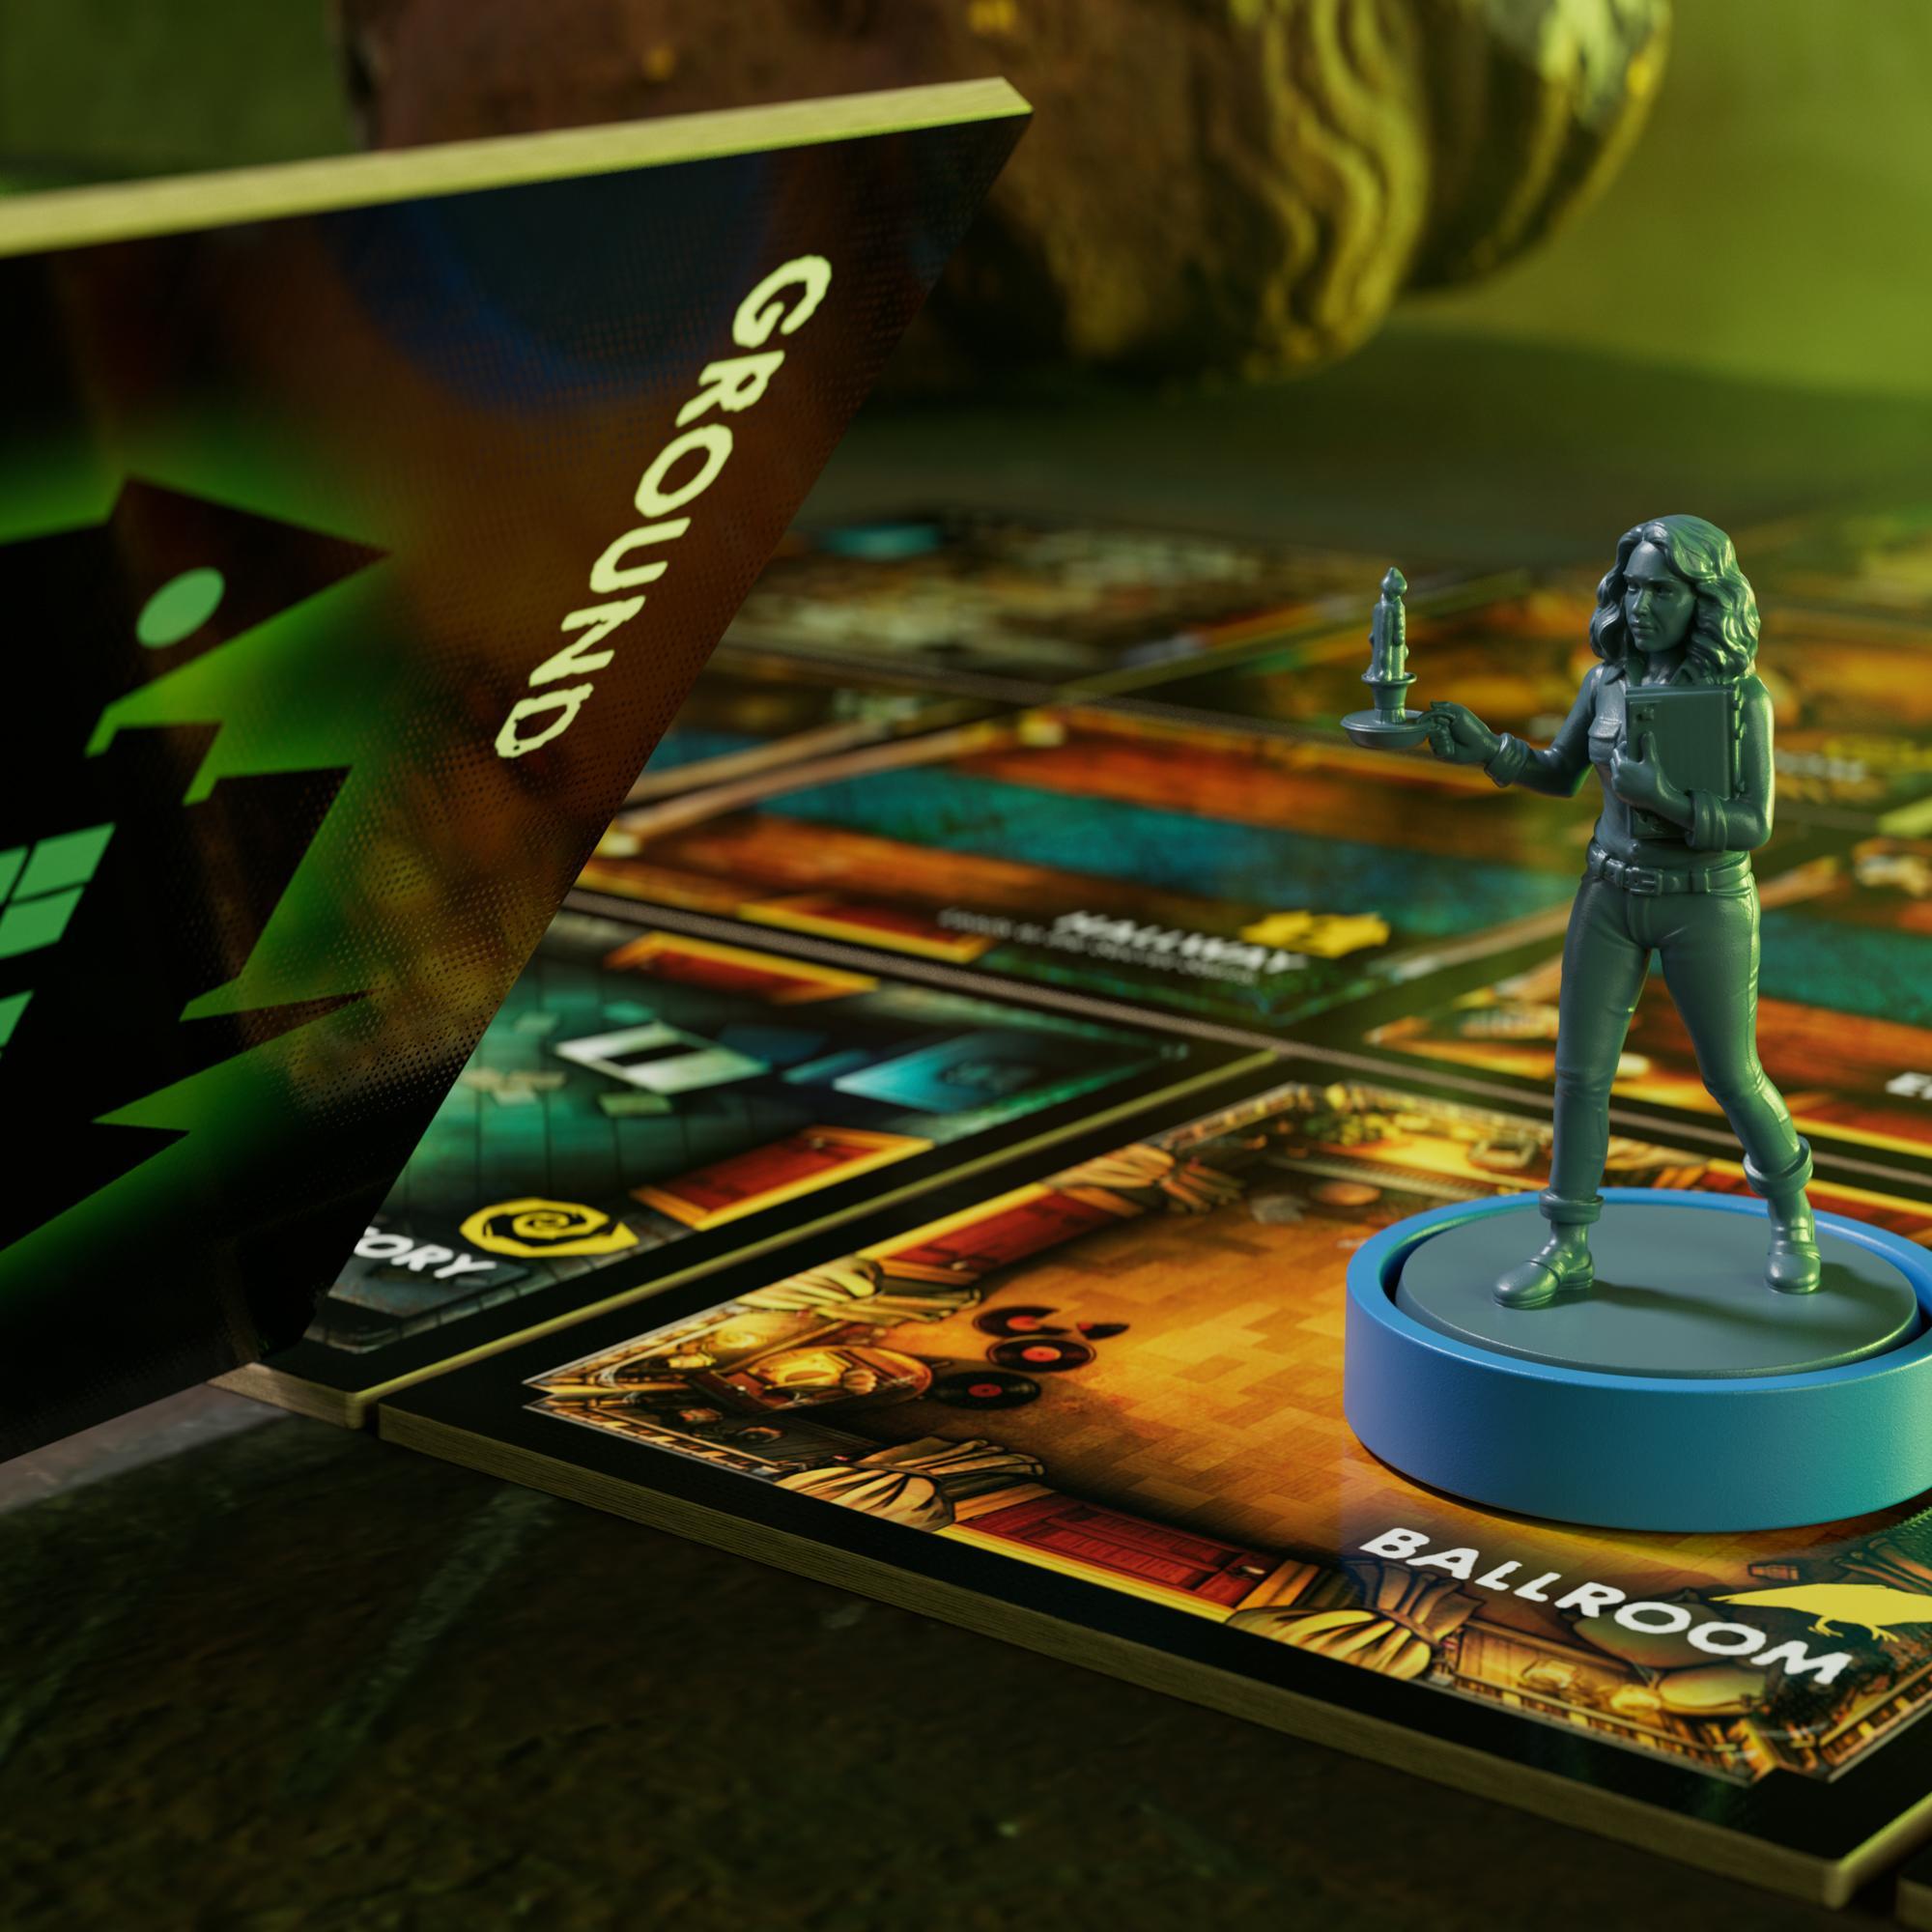 Avalon Hill Betrayal at House on the Hill 3rd Edition Cooperative Board Game, for Ages 12 and Up for 3-6 Players product thumbnail 1